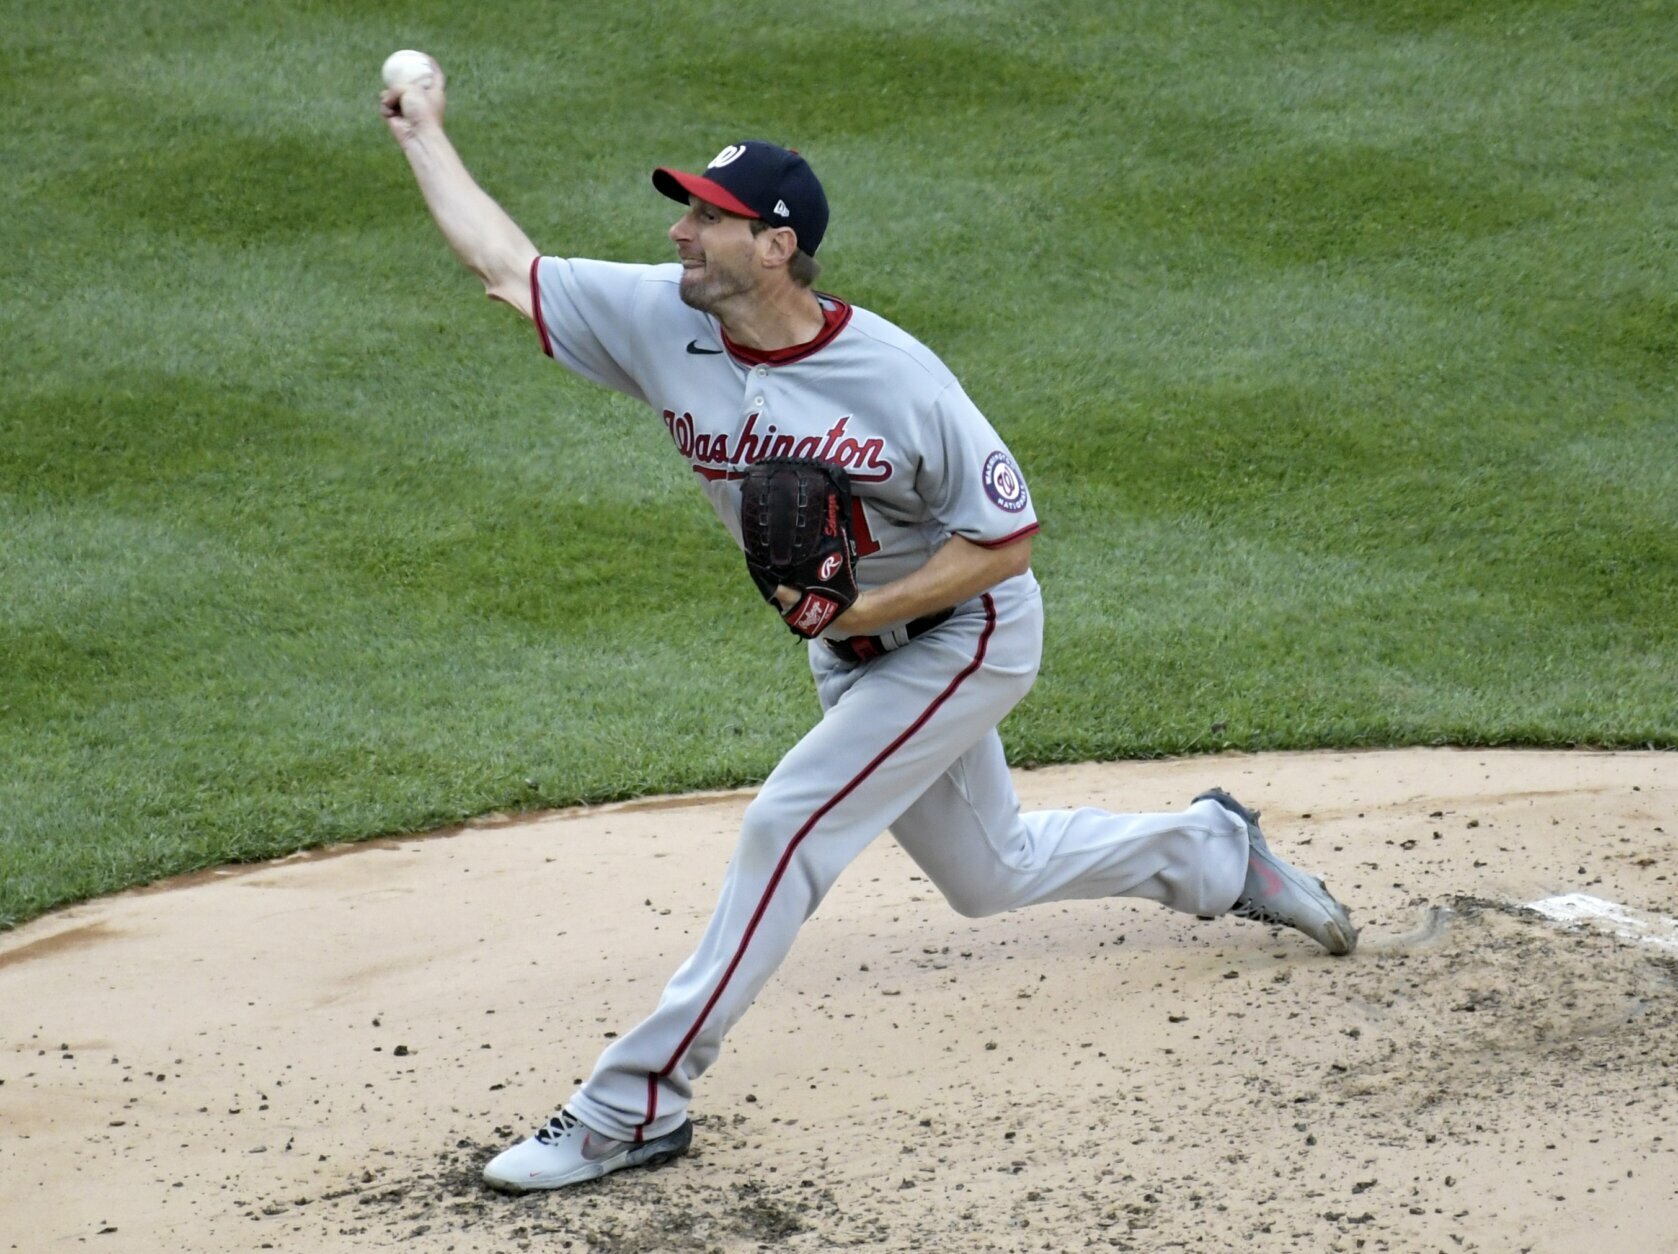 Scherzer moves into 11th place on MLB's career strikeout list